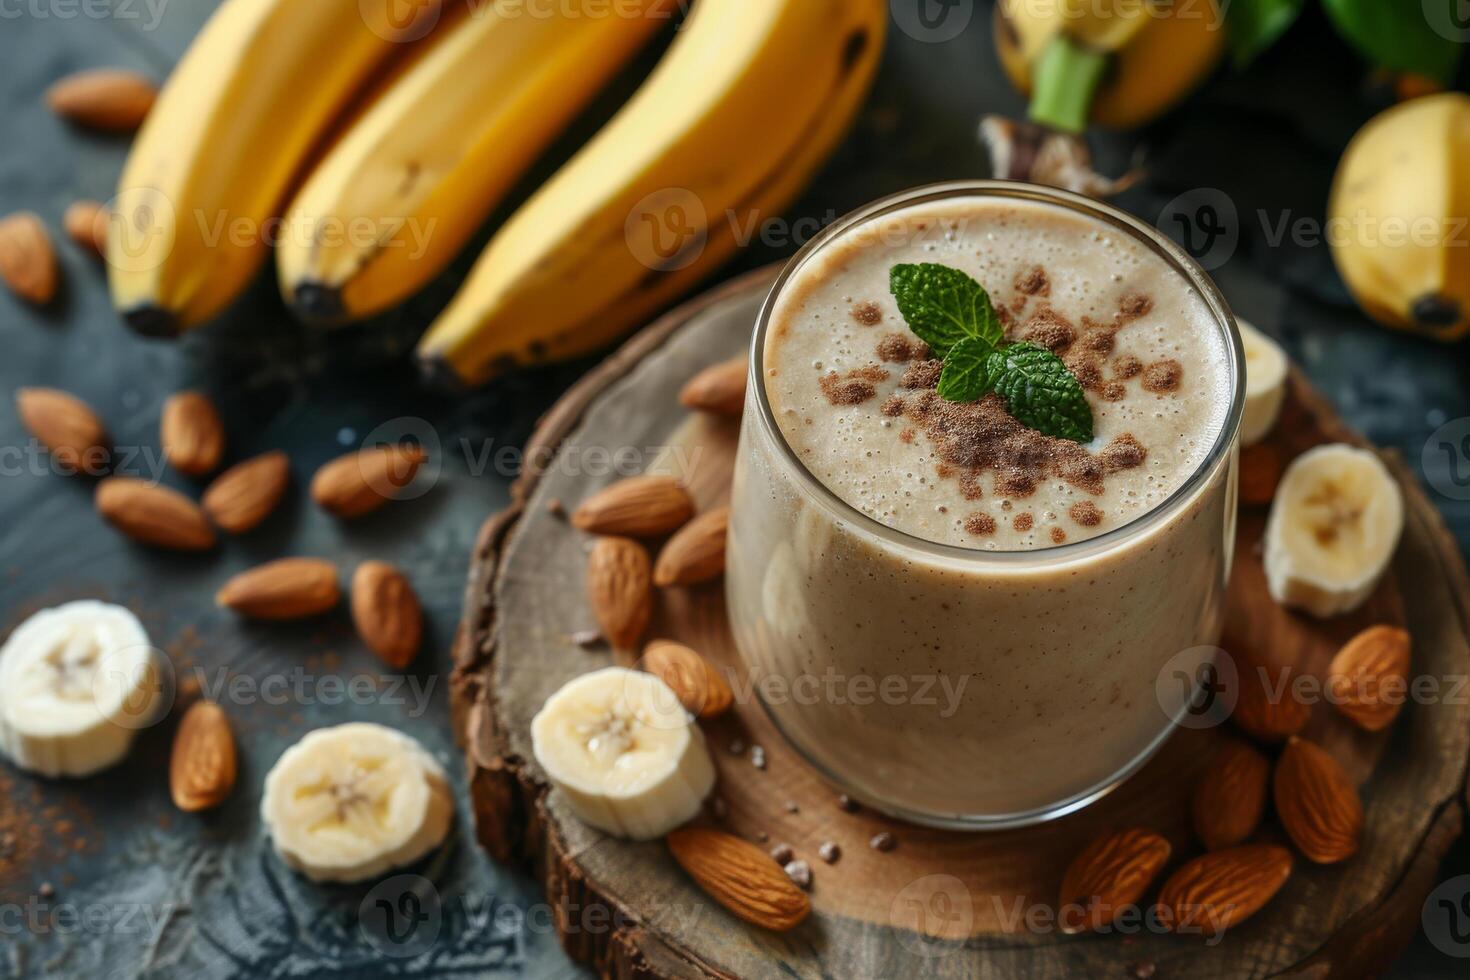 A glass of smoothie with bananas and almonds on a wooden table photo